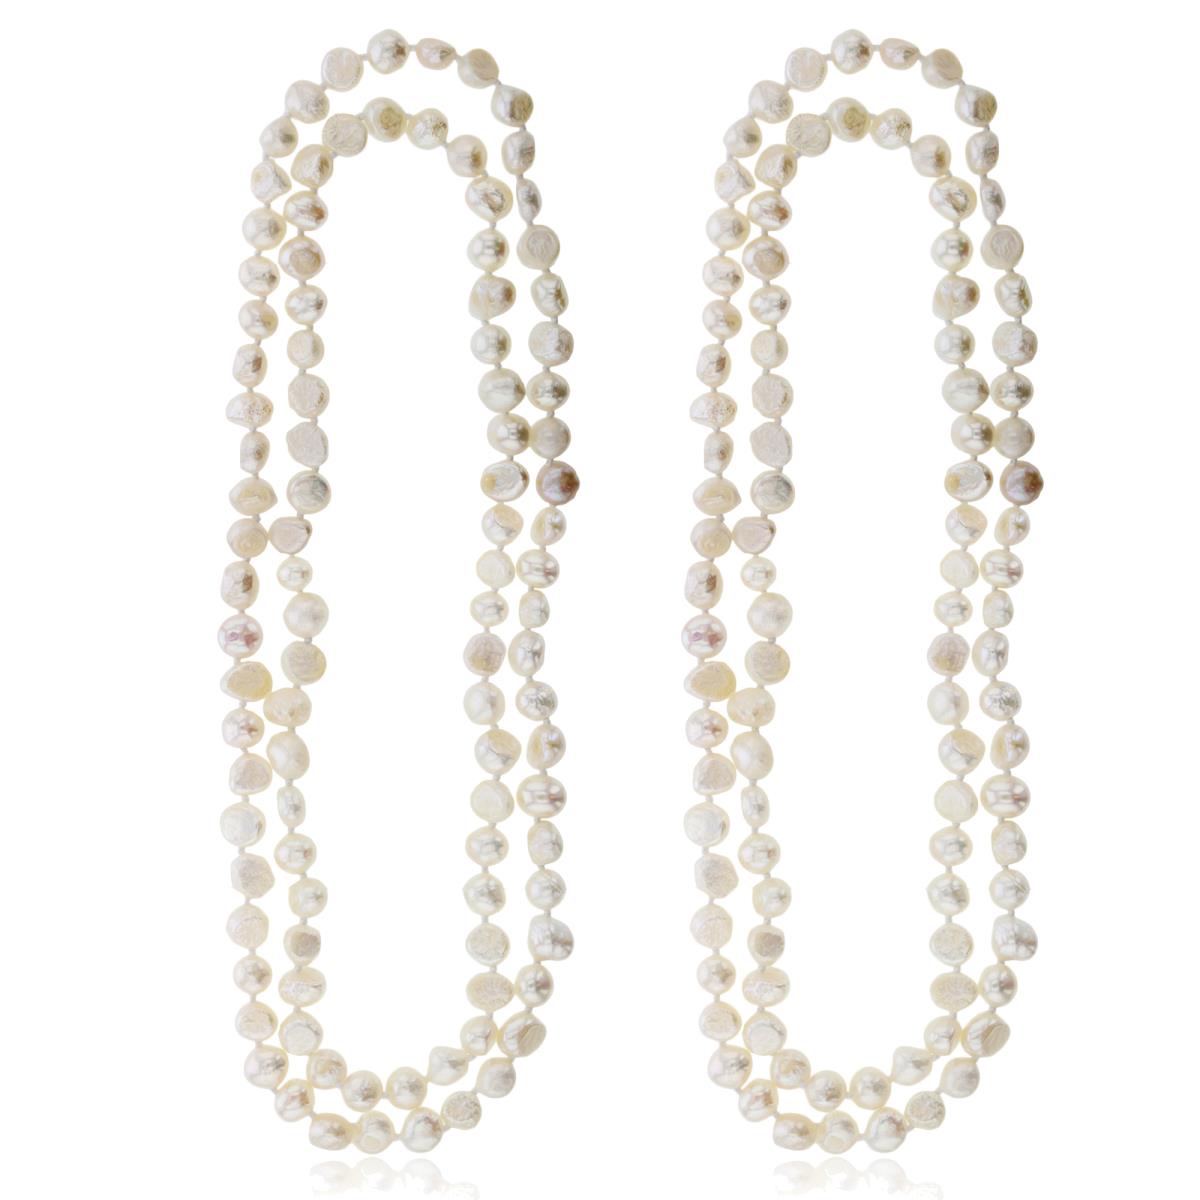 8-9mm Assorted White Fresh Water Pearls 24" Necklace Set of 2